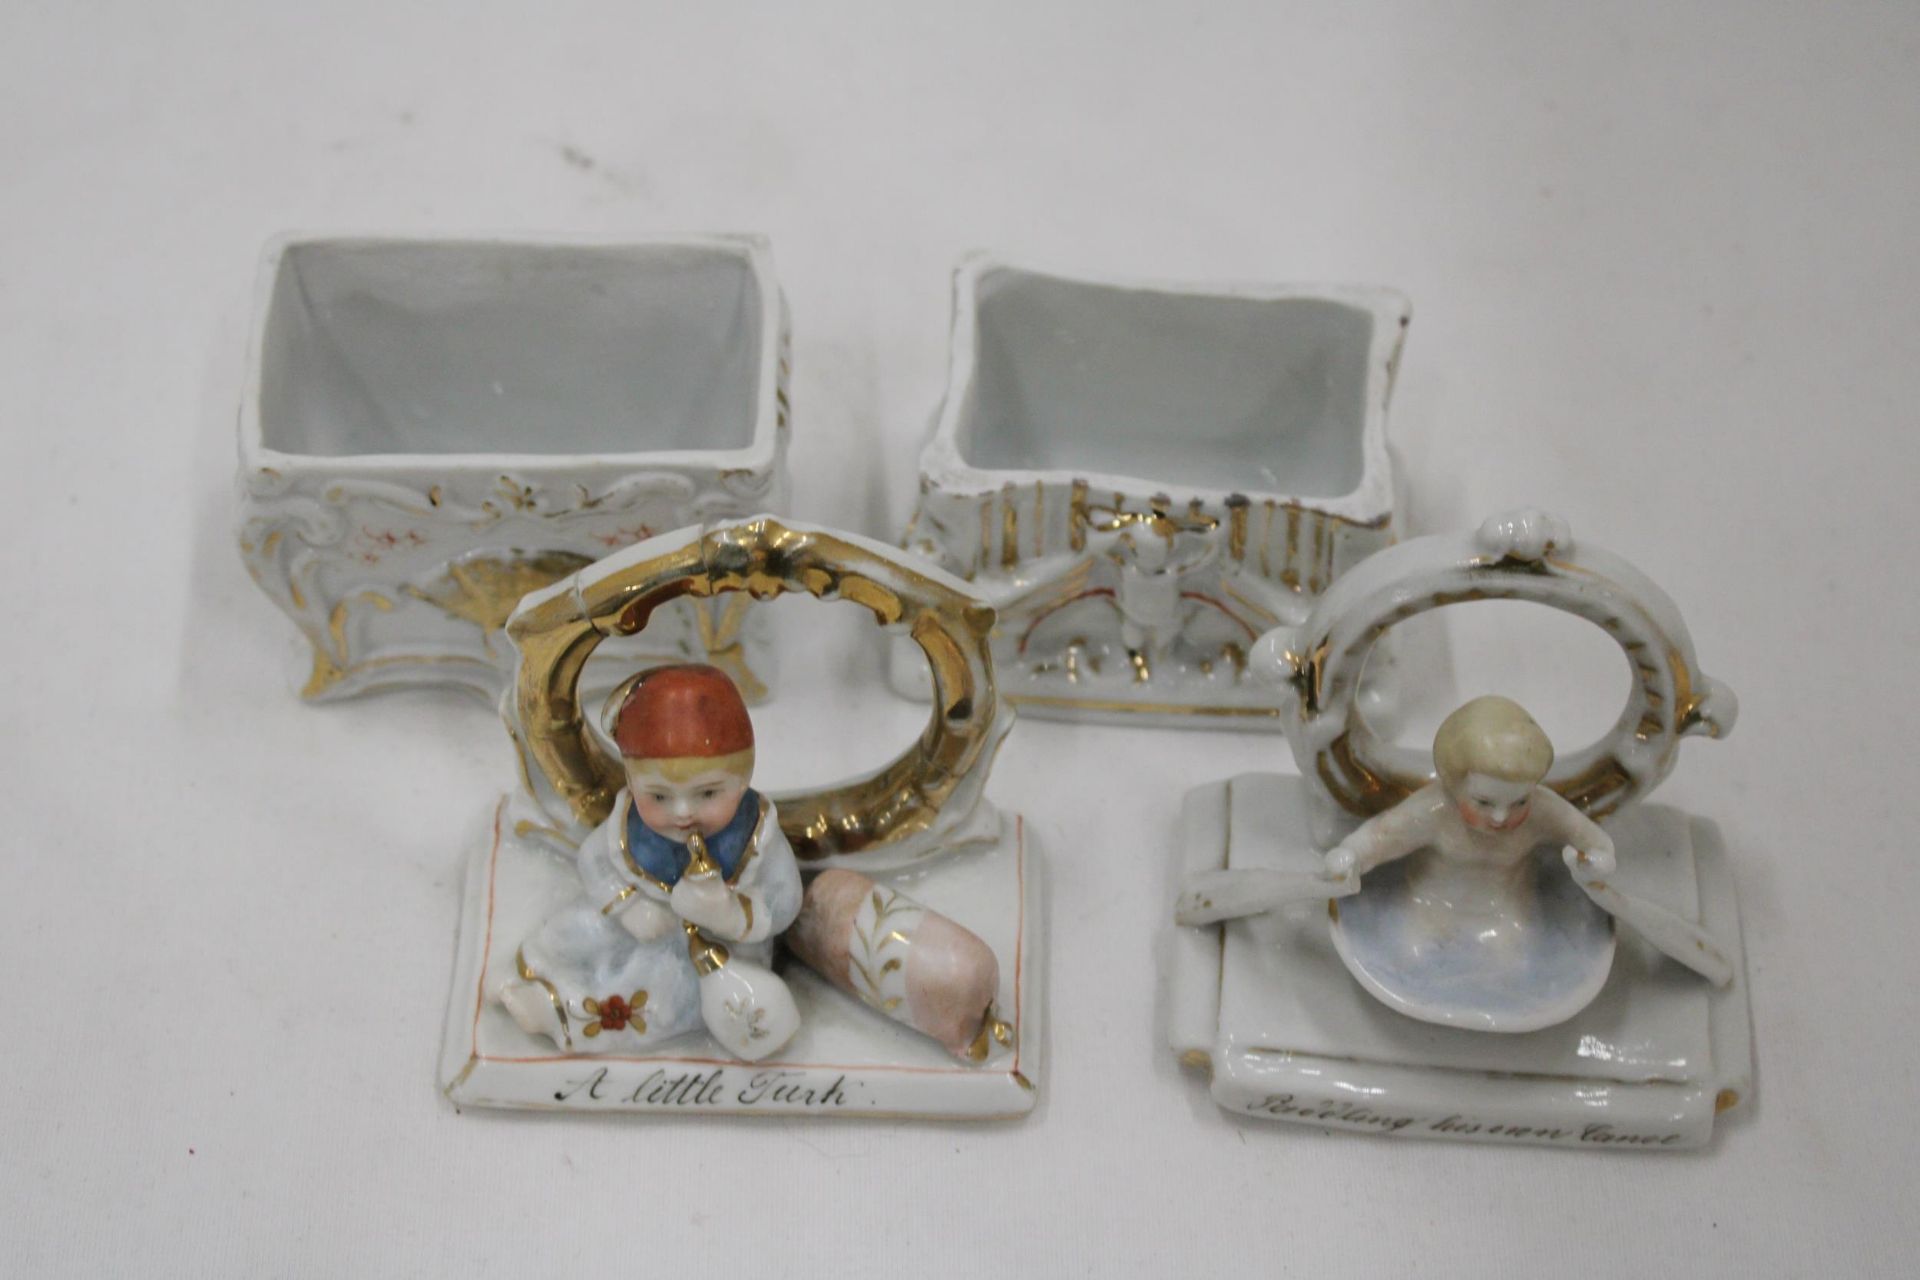 TWO VINTAGE GERMAN CONTA AND BOHME FAIRINGS TRINKET BOXES, TO INCLUDE 'A LITTLE TURK' - RESTORED AND - Bild 3 aus 6